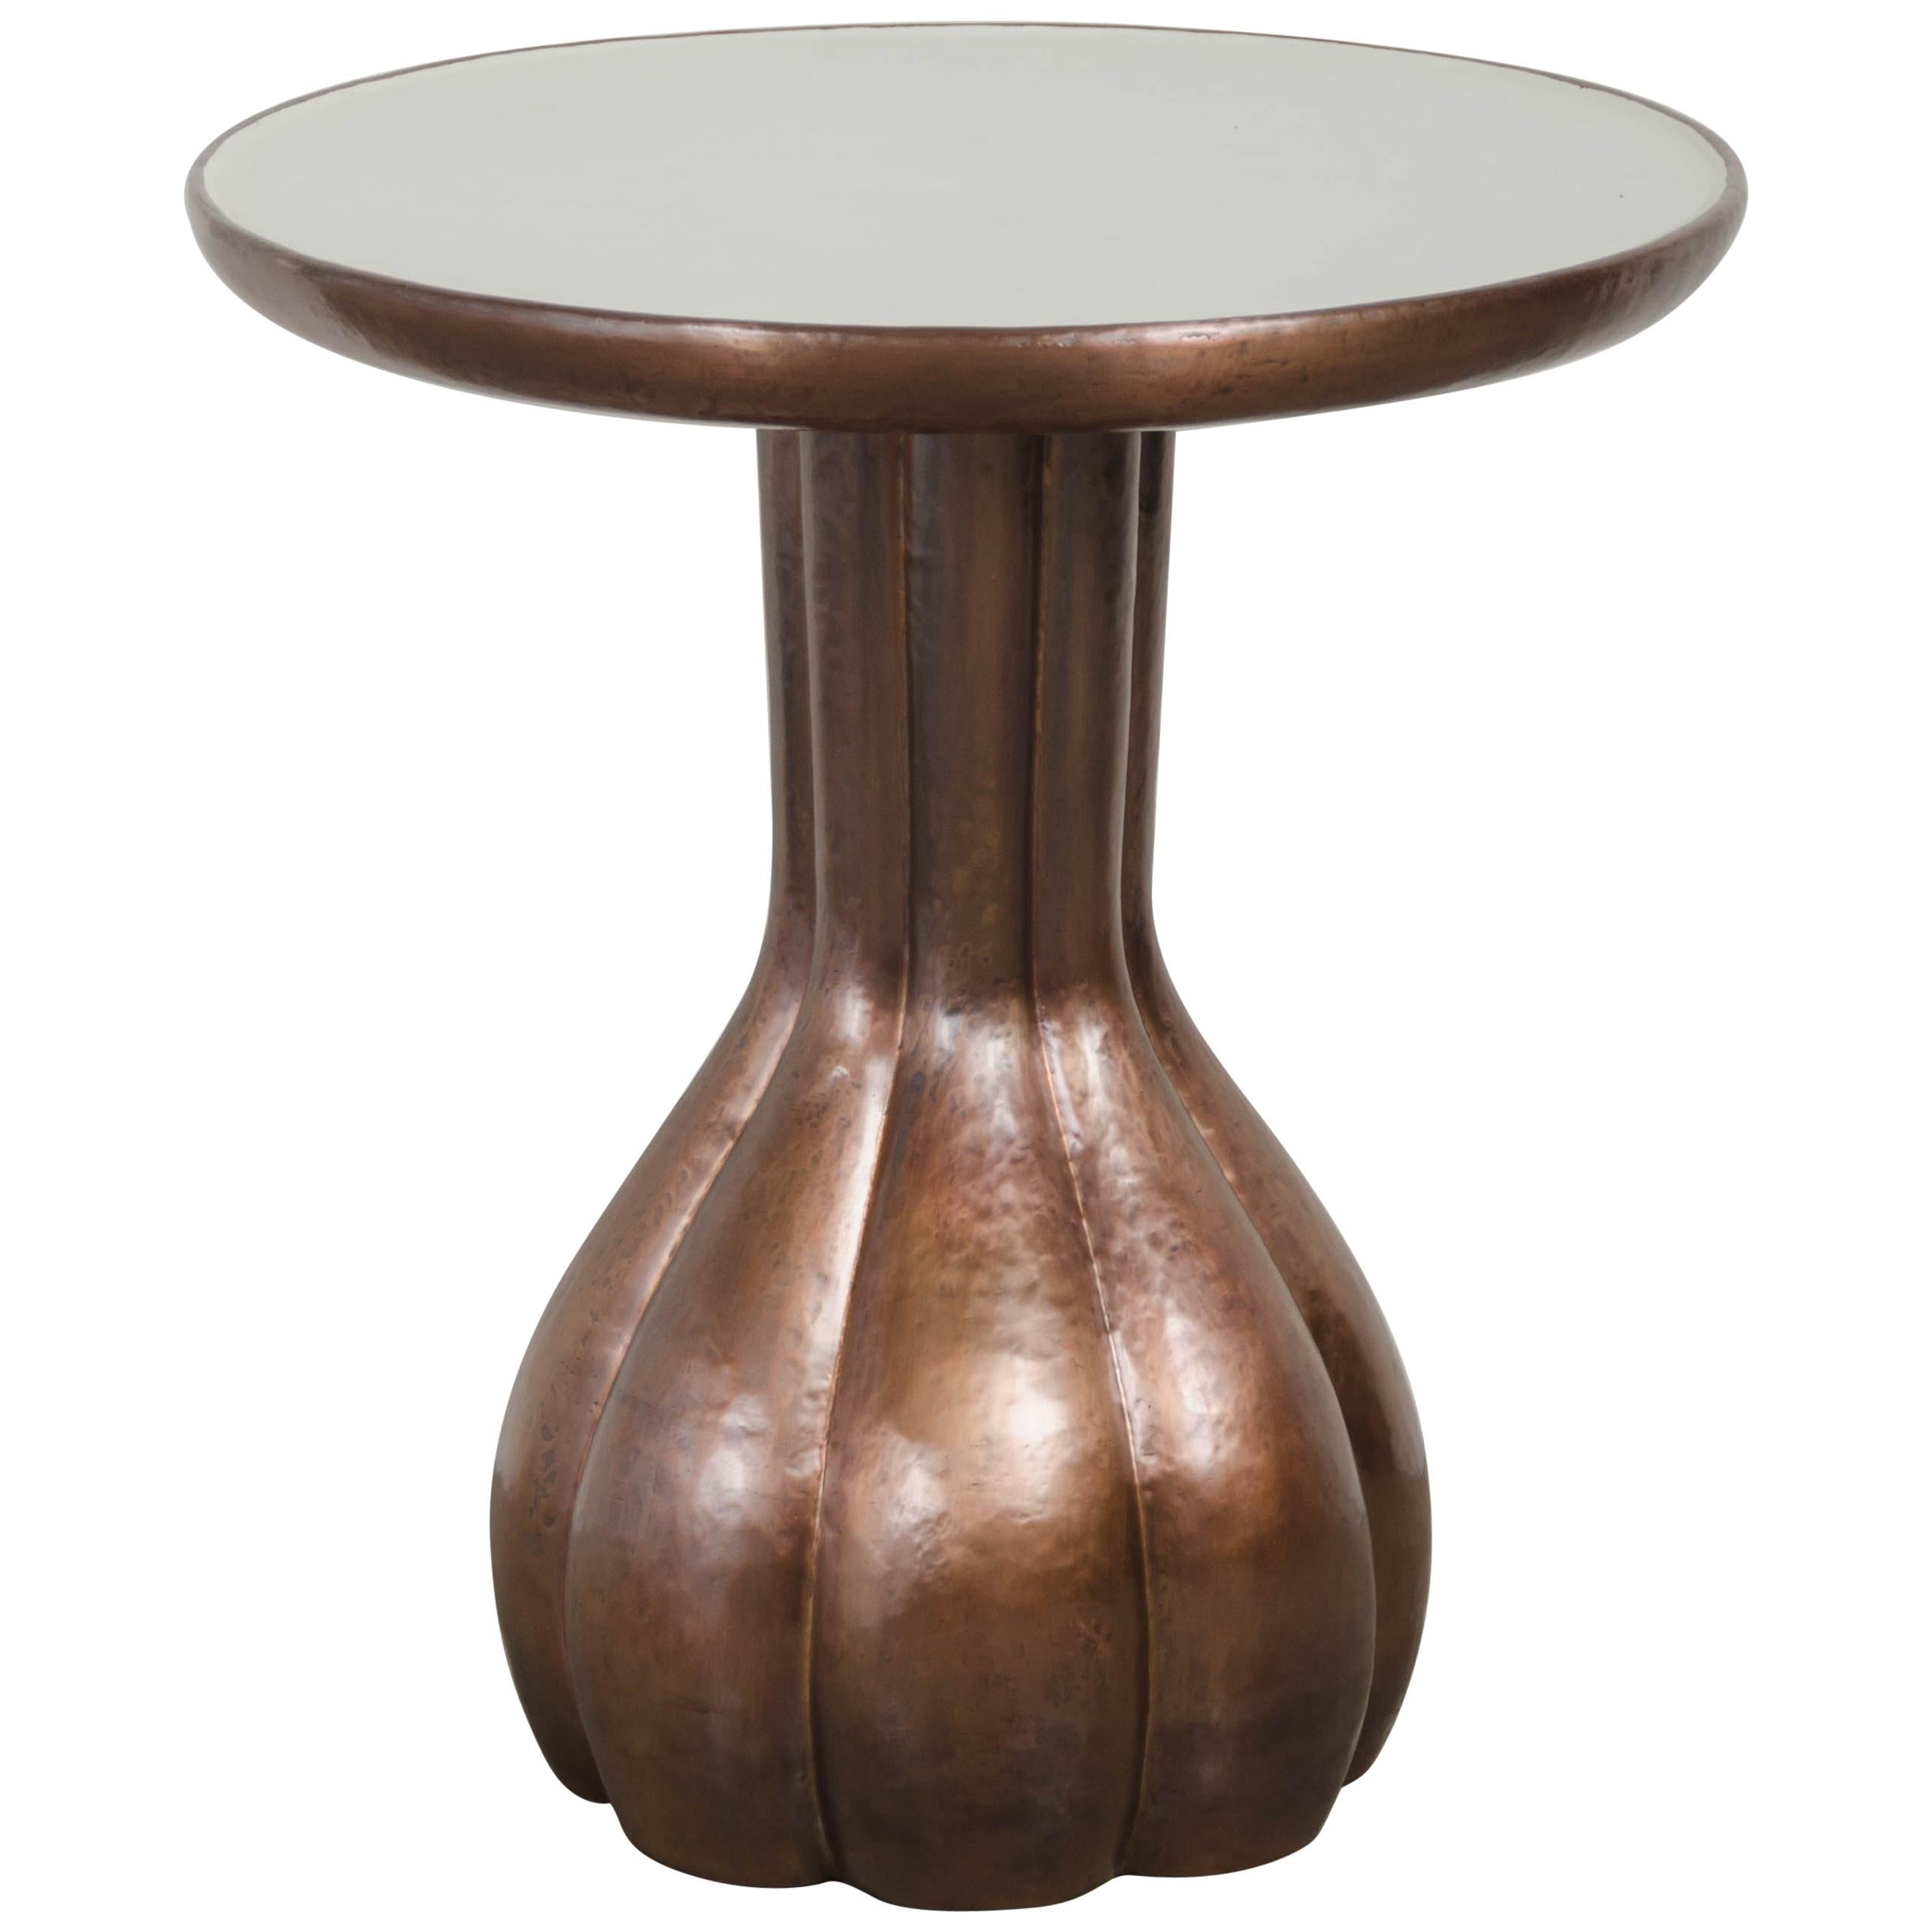 Lobed Le Verre Table - Cream Lacquer and Copper by Robert Kuo, Limited Edition For Sale